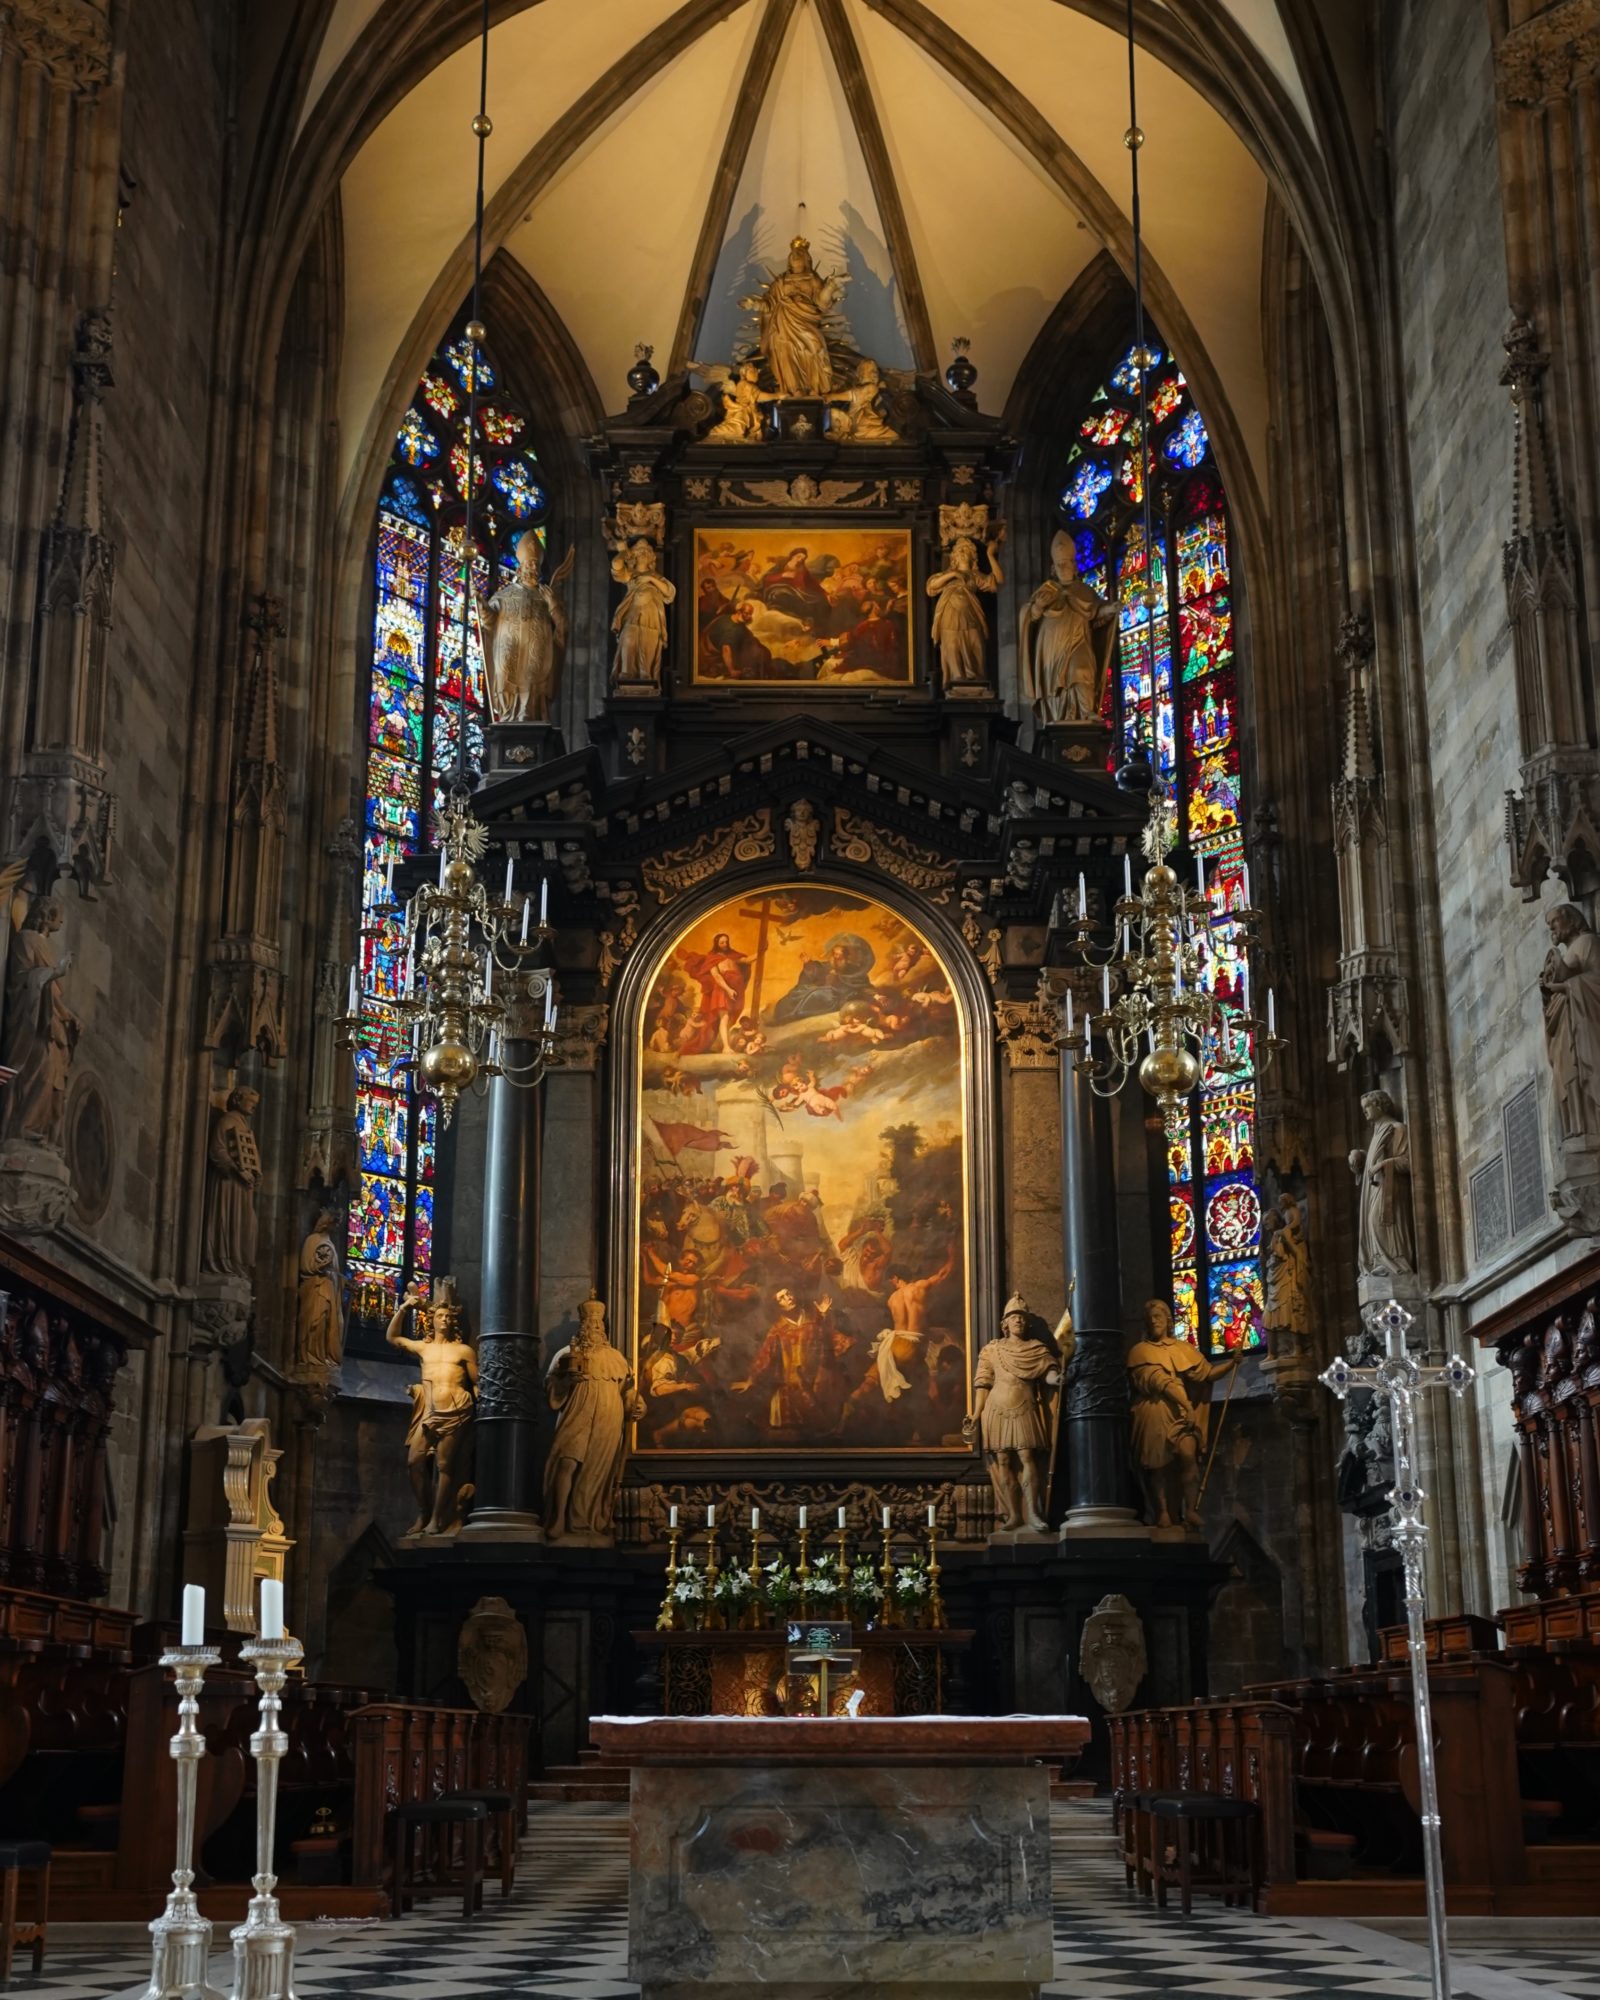 St. Stephen's High Altar: behind it is a big painting of St. Stephen framed in black marble, surrounded by stained glass and statues